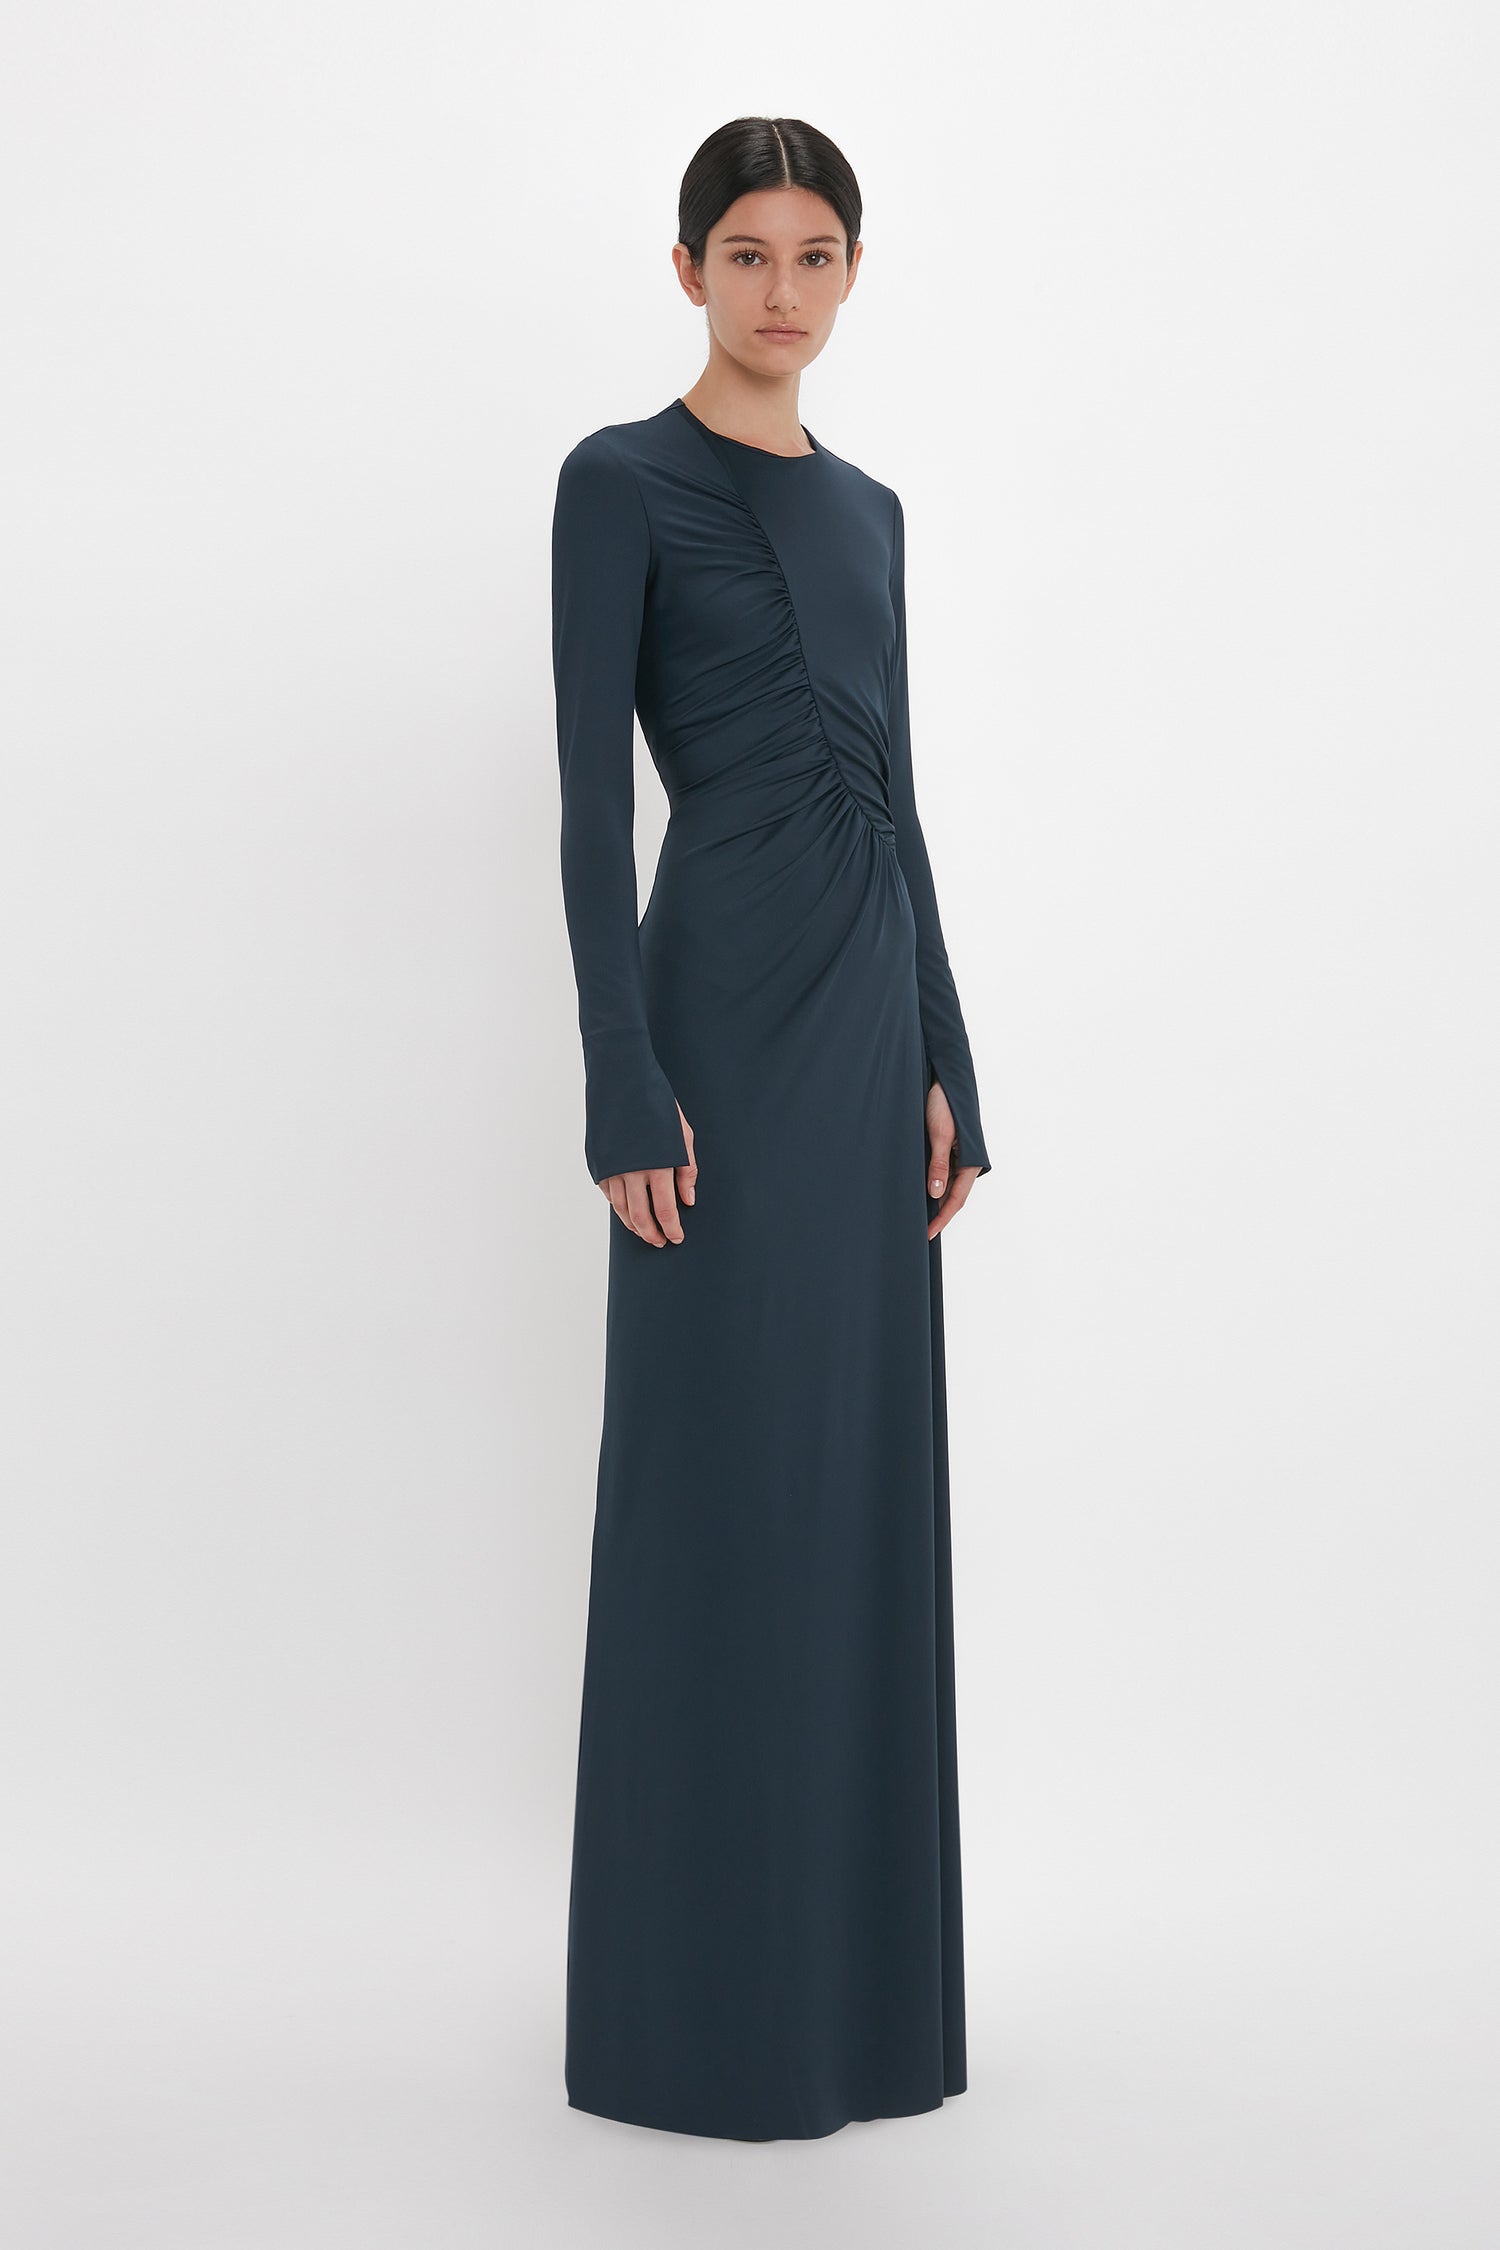 A woman stands wearing a dark blue, long-sleeve, floor-length dress with ruched detailing on the front. Her elegant Ruched Detail Floor-Length Gown In Midnight by Victoria Beckham is posed against a plain white background.